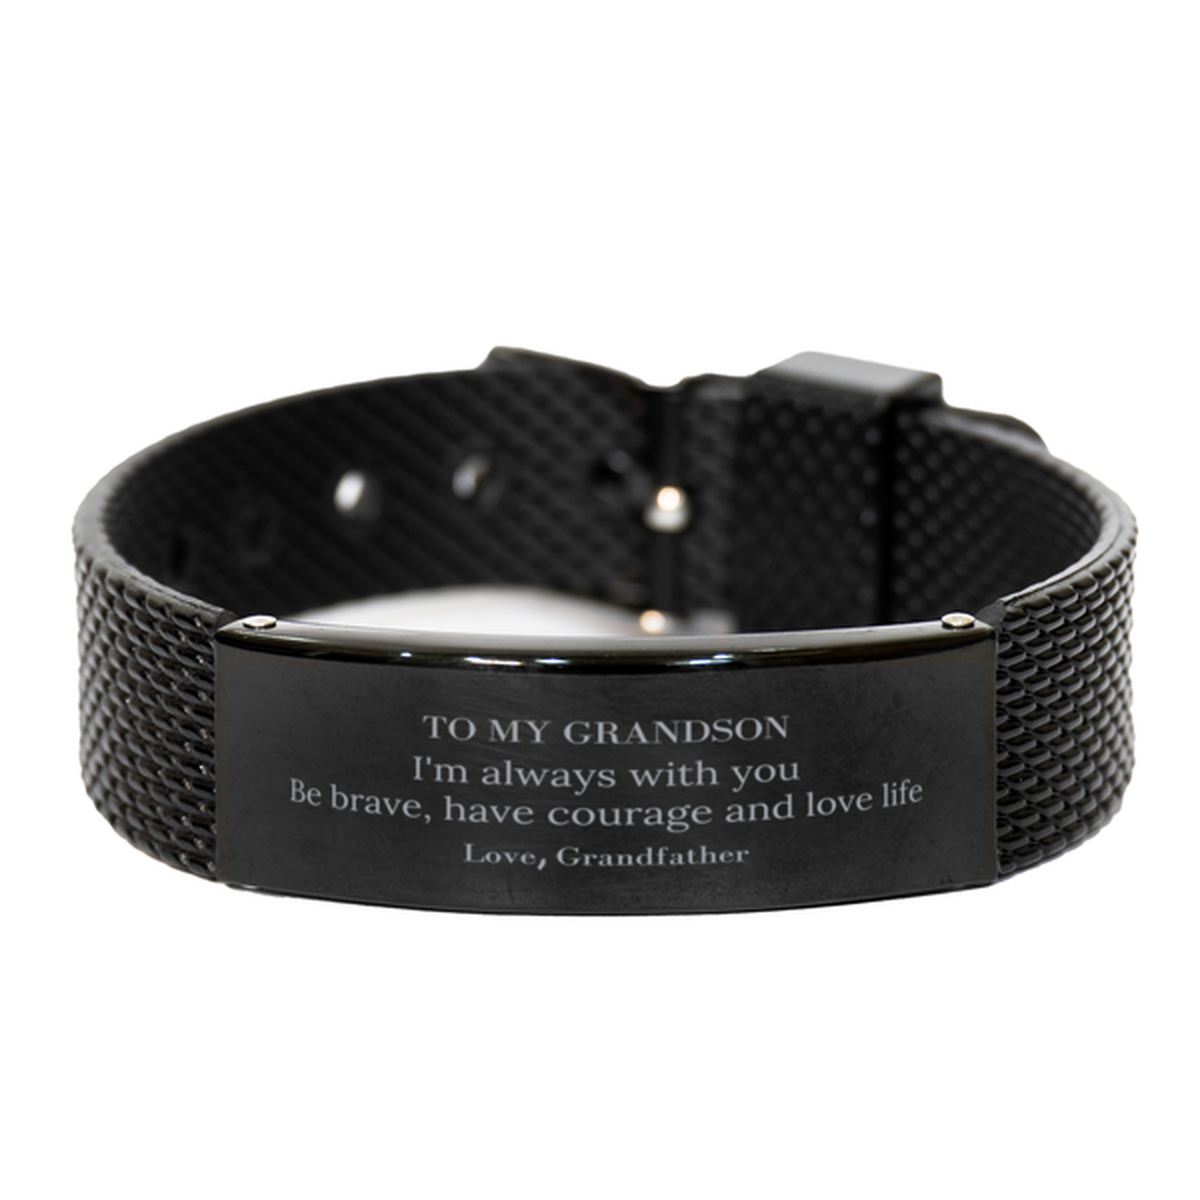 To My Grandson Gifts from Grandfather, Unique Black Shark Mesh Bracelet Inspirational Christmas Birthday Graduation Gifts for Grandson I'm always with you. Be brave, have courage and love life. Love, Grandfather